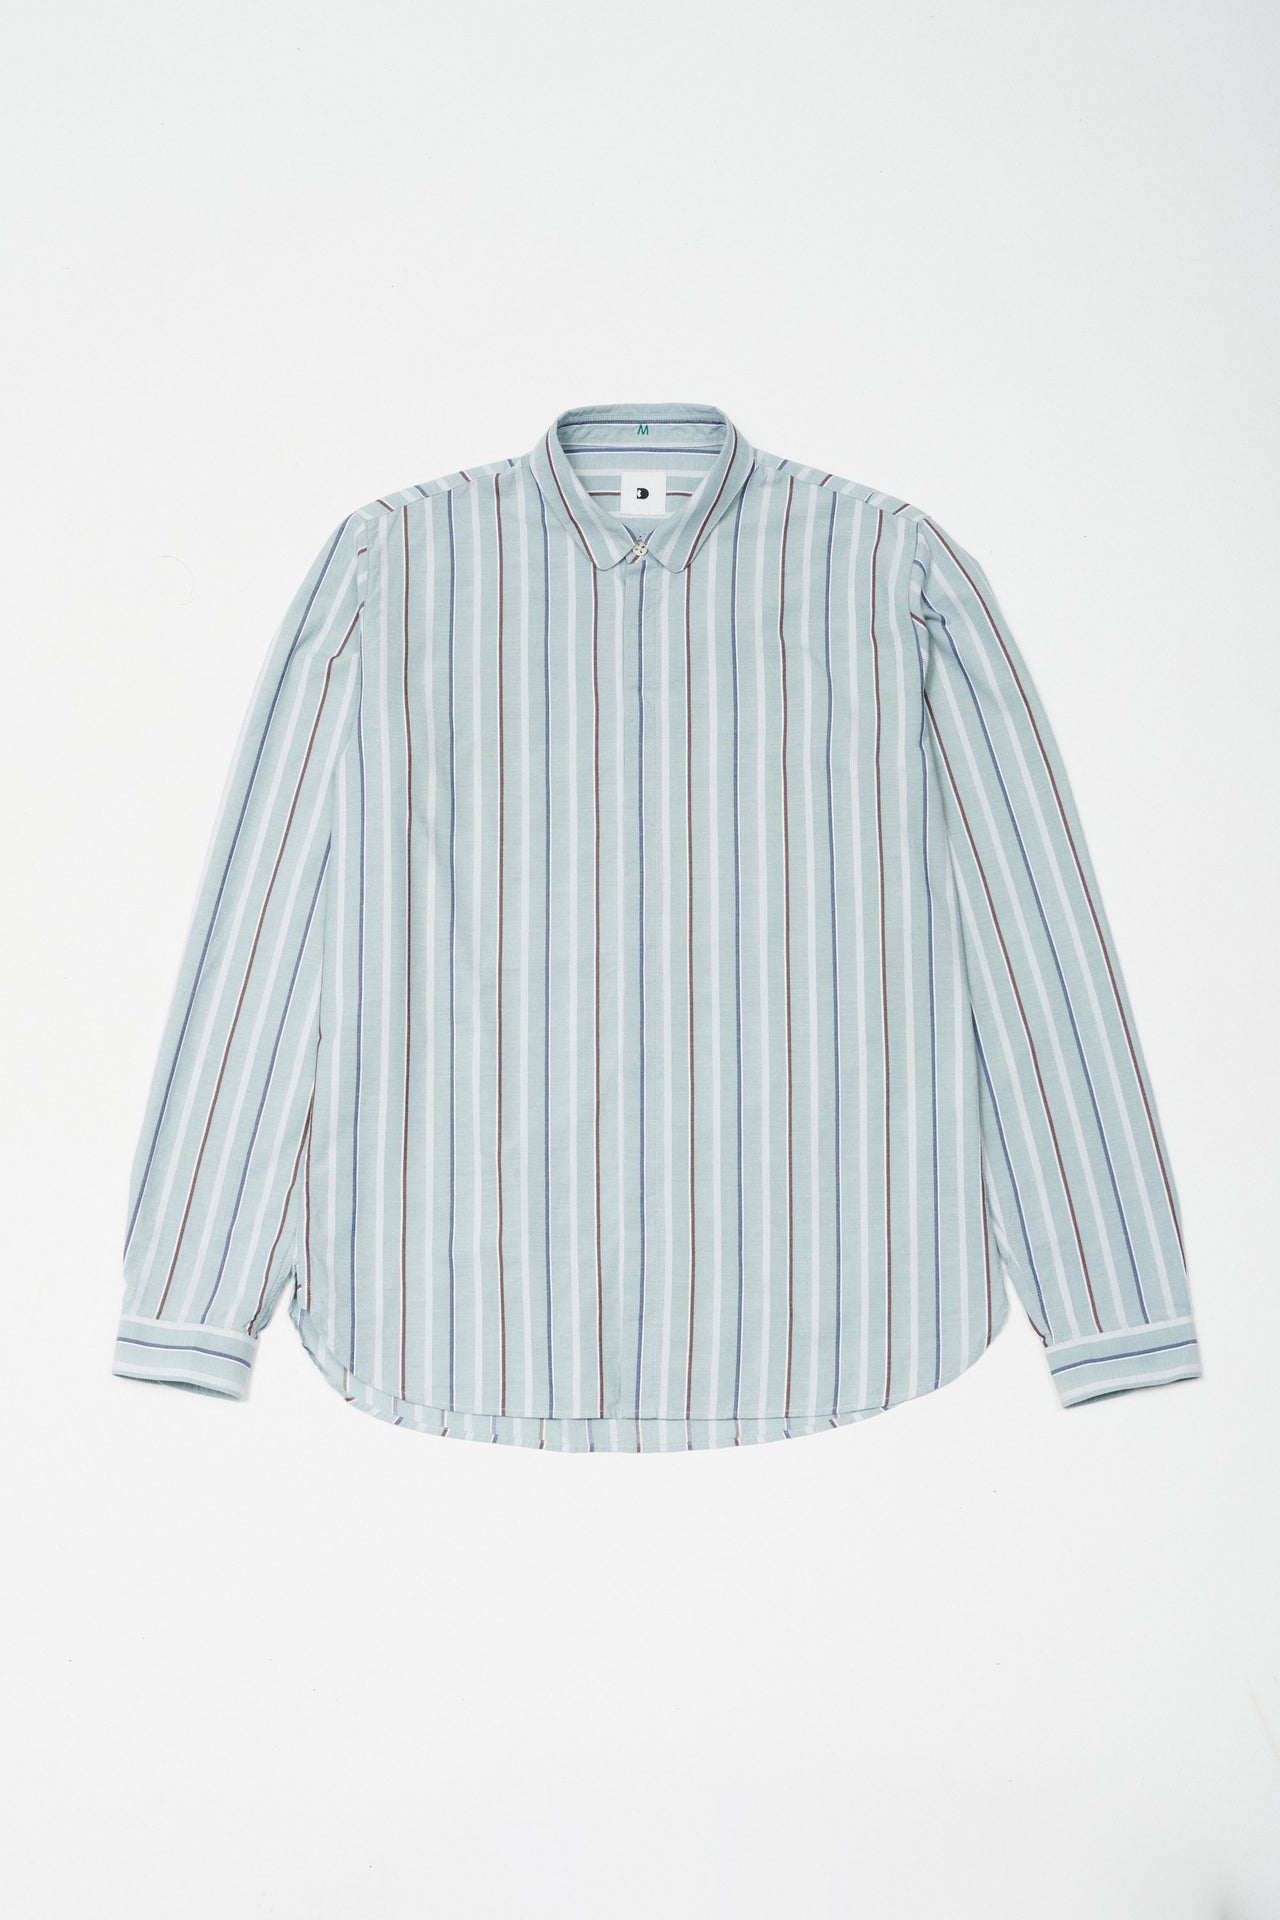 Cute Round Collar Shirt in a Mint Green, Blue, Brown and White Striped Italian Organic Cotton